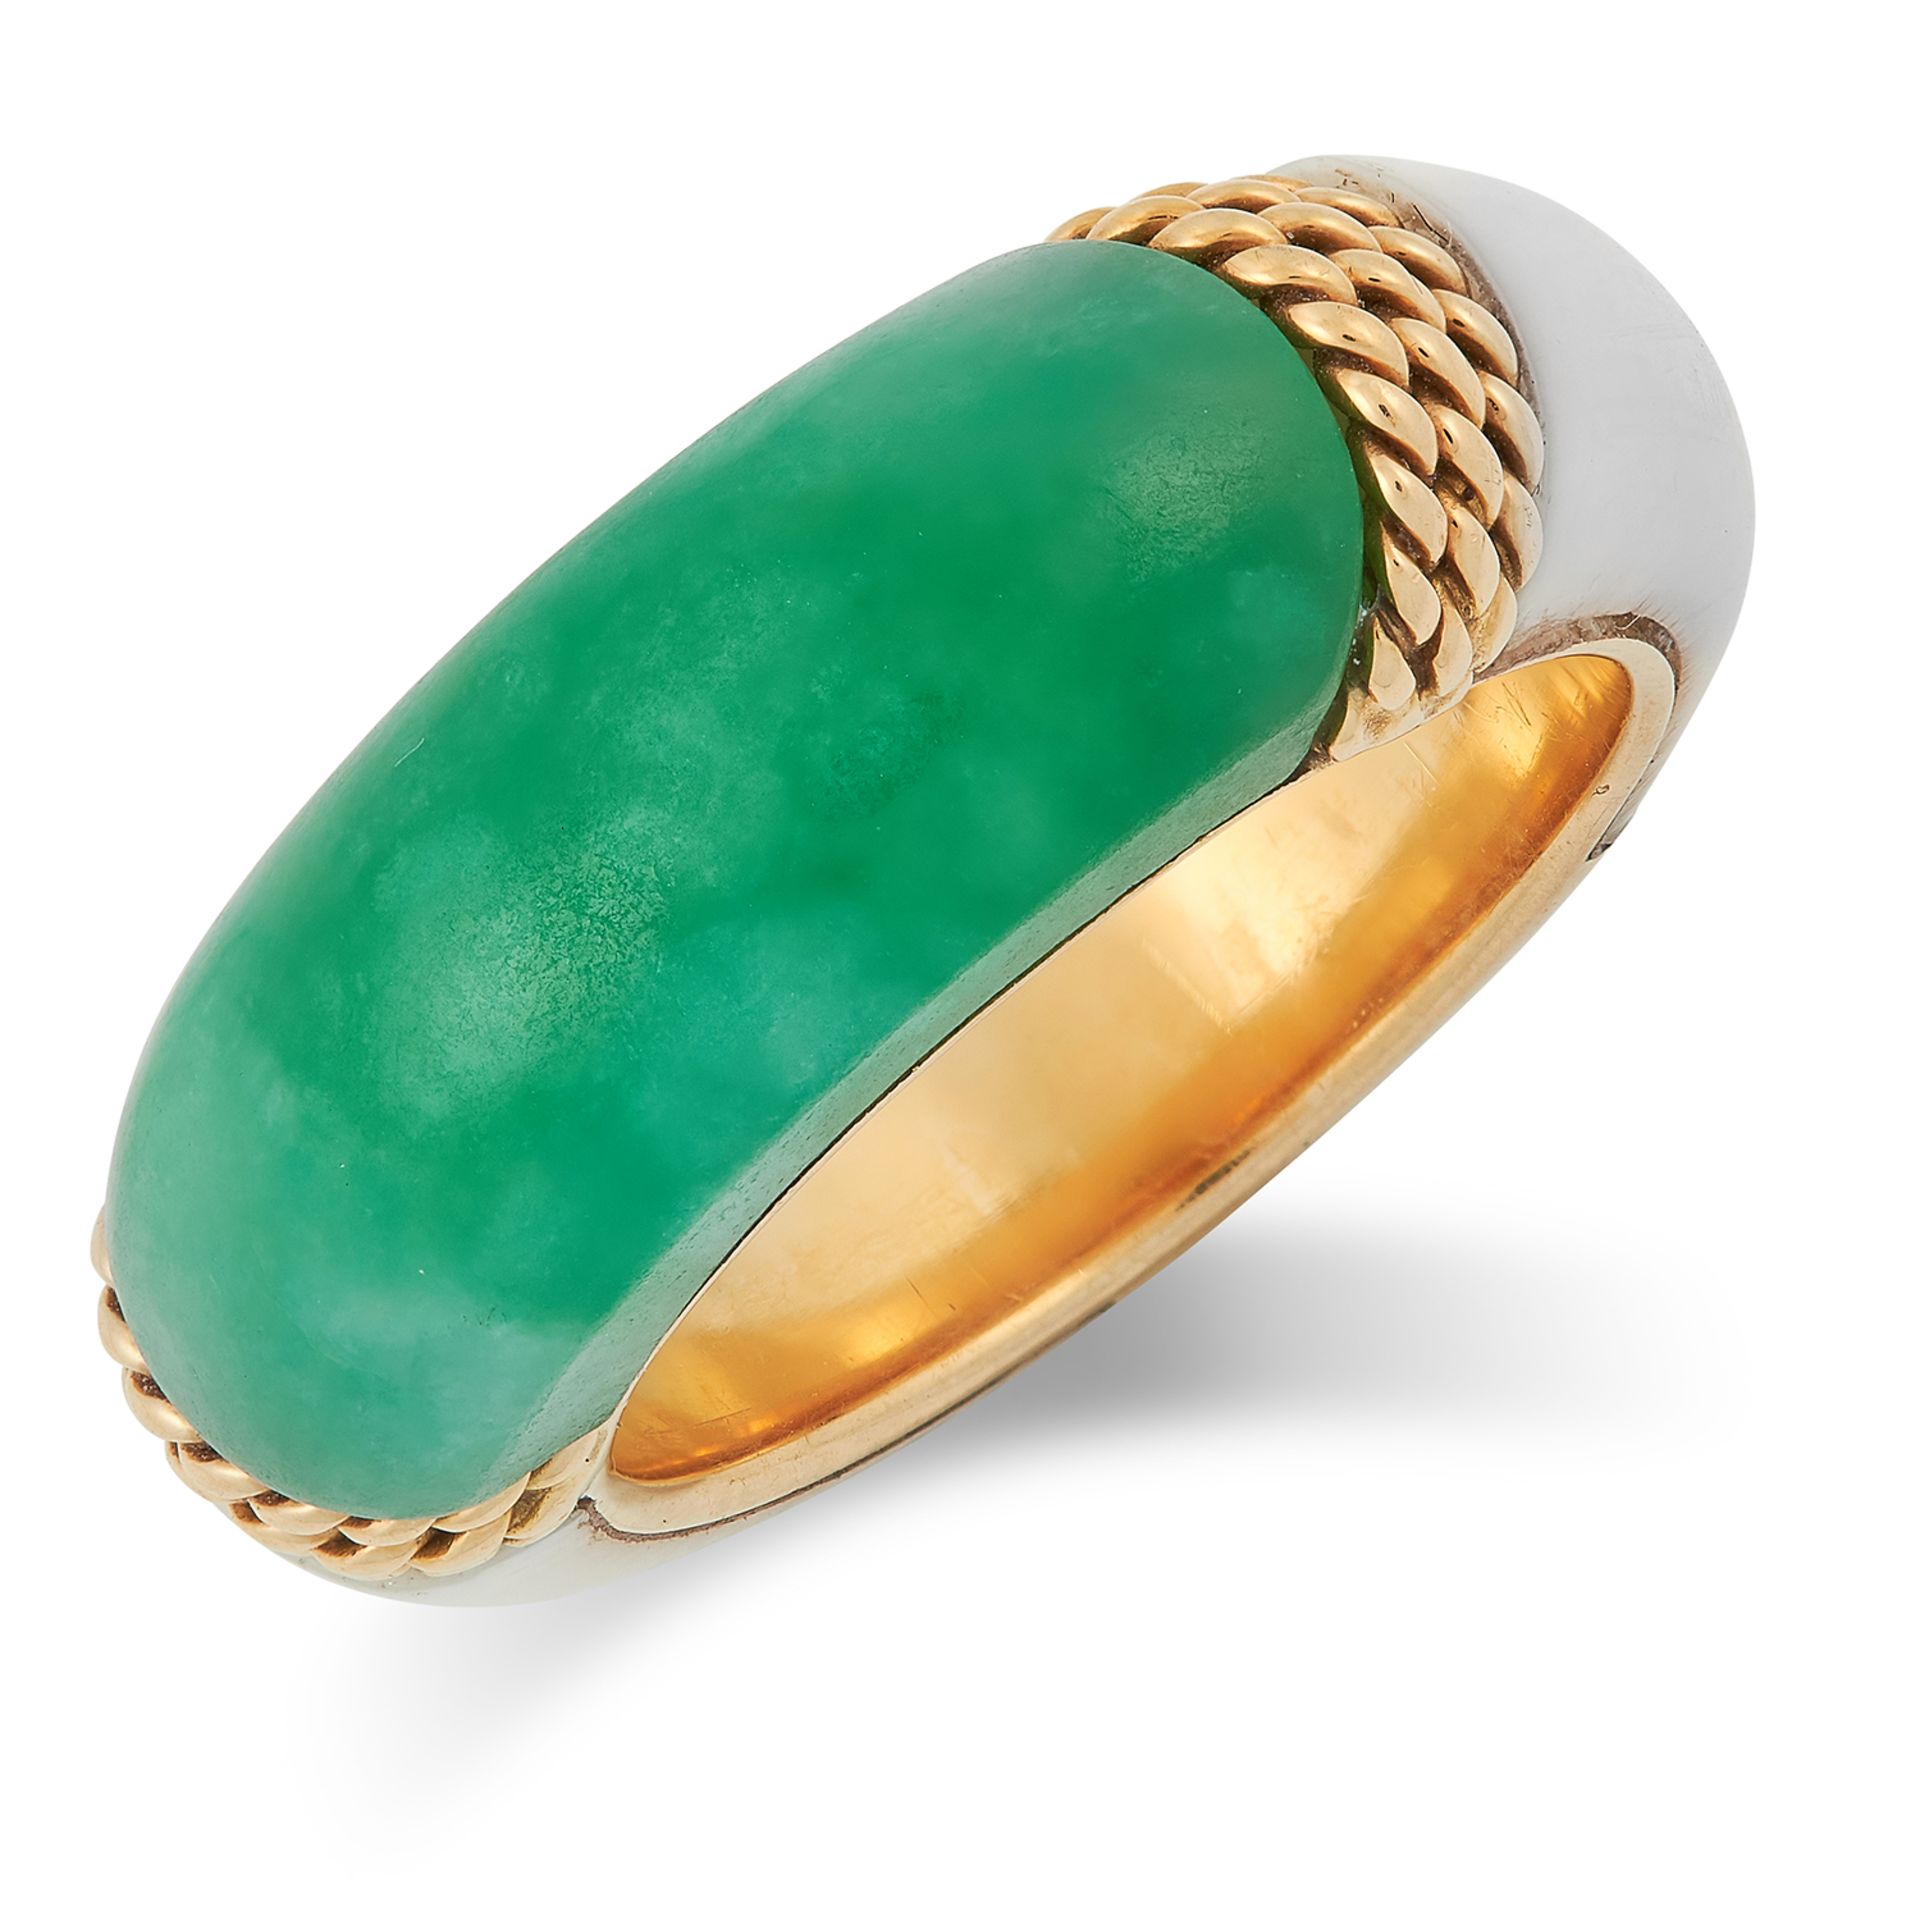 AN ANTIQUE JADE AND IVORY RING, BOUCHERON set with a piece of polished jade between two pieces of